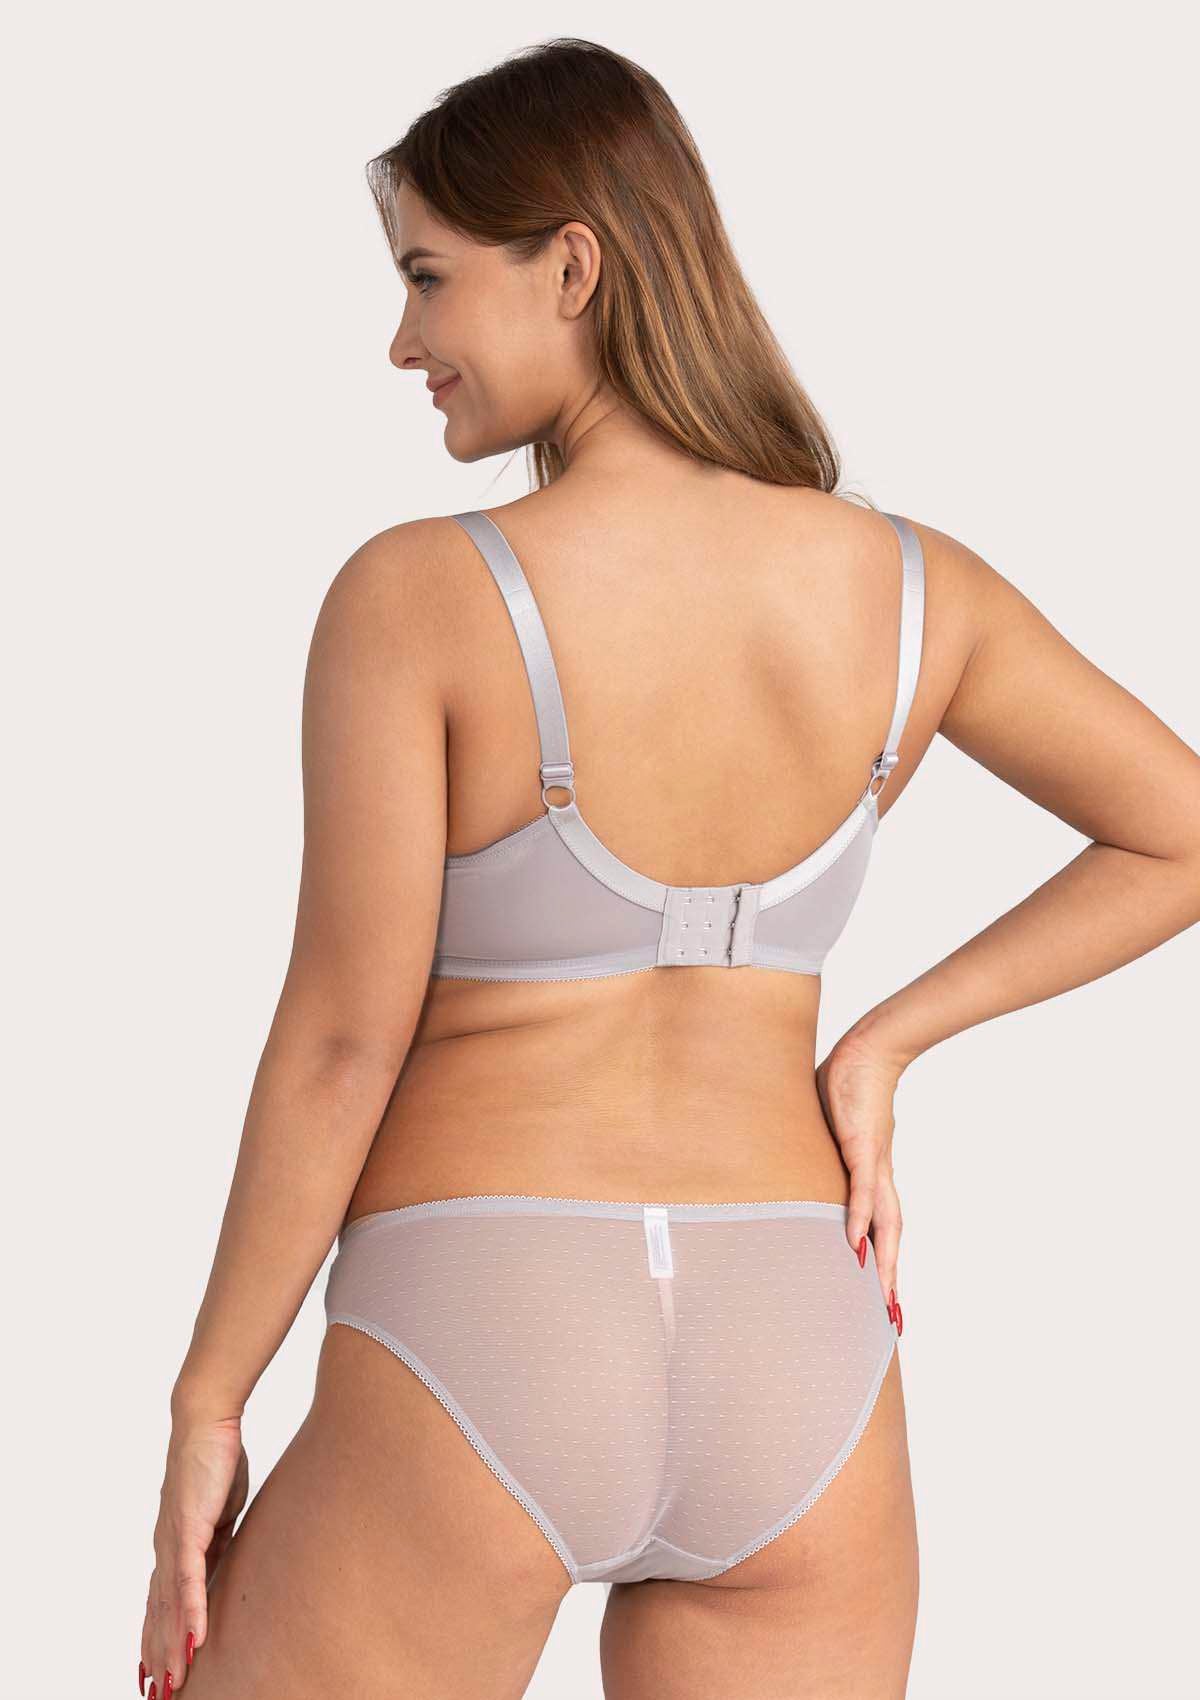 HSIA Enchante Lace Bra And Panties Set: Back Support Bra For Posture - Light Gray / 36 / C